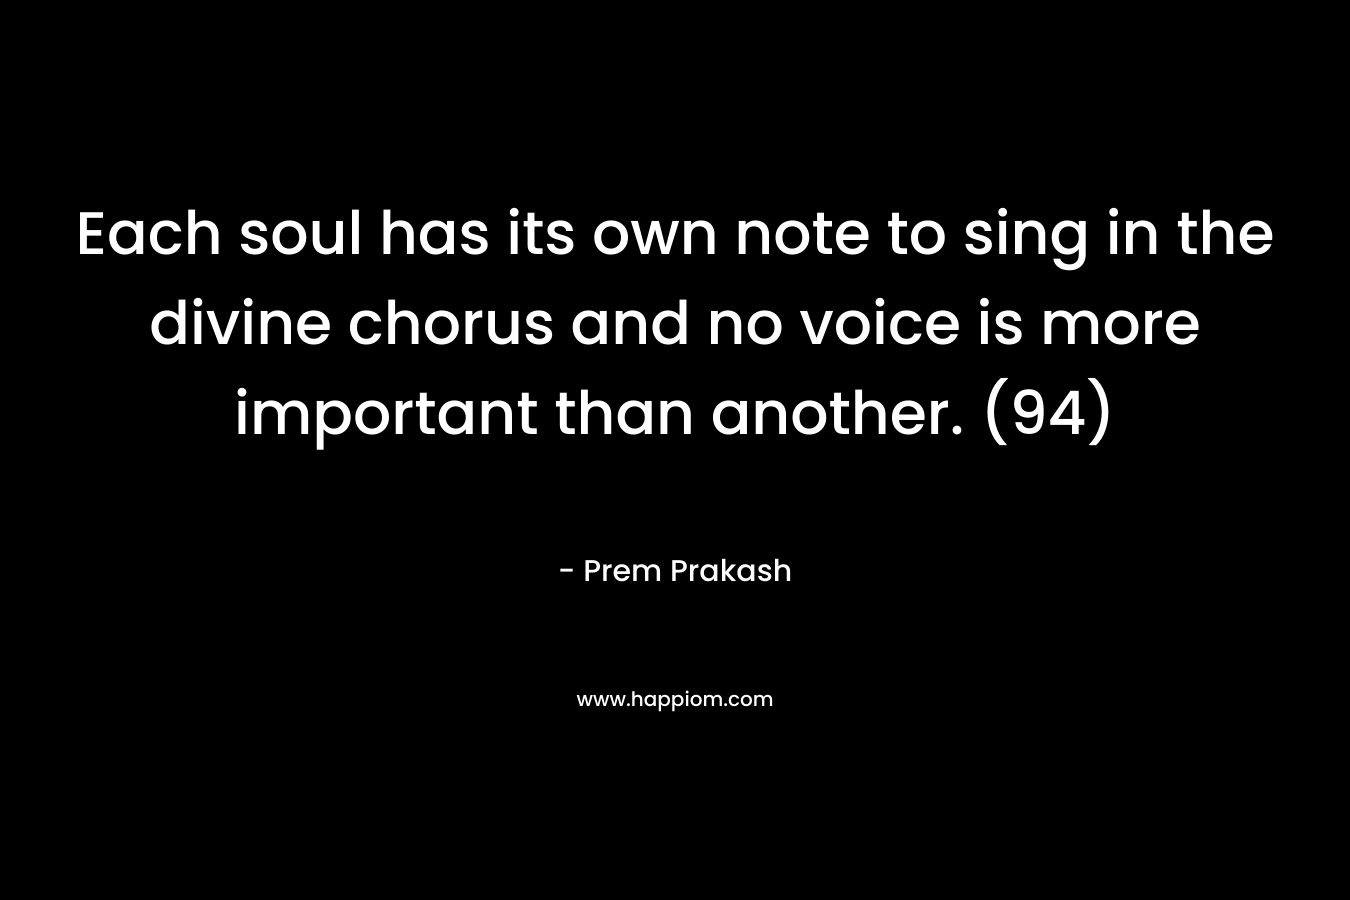 Each soul has its own note to sing in the divine chorus and no voice is more important than another. (94) – Prem Prakash